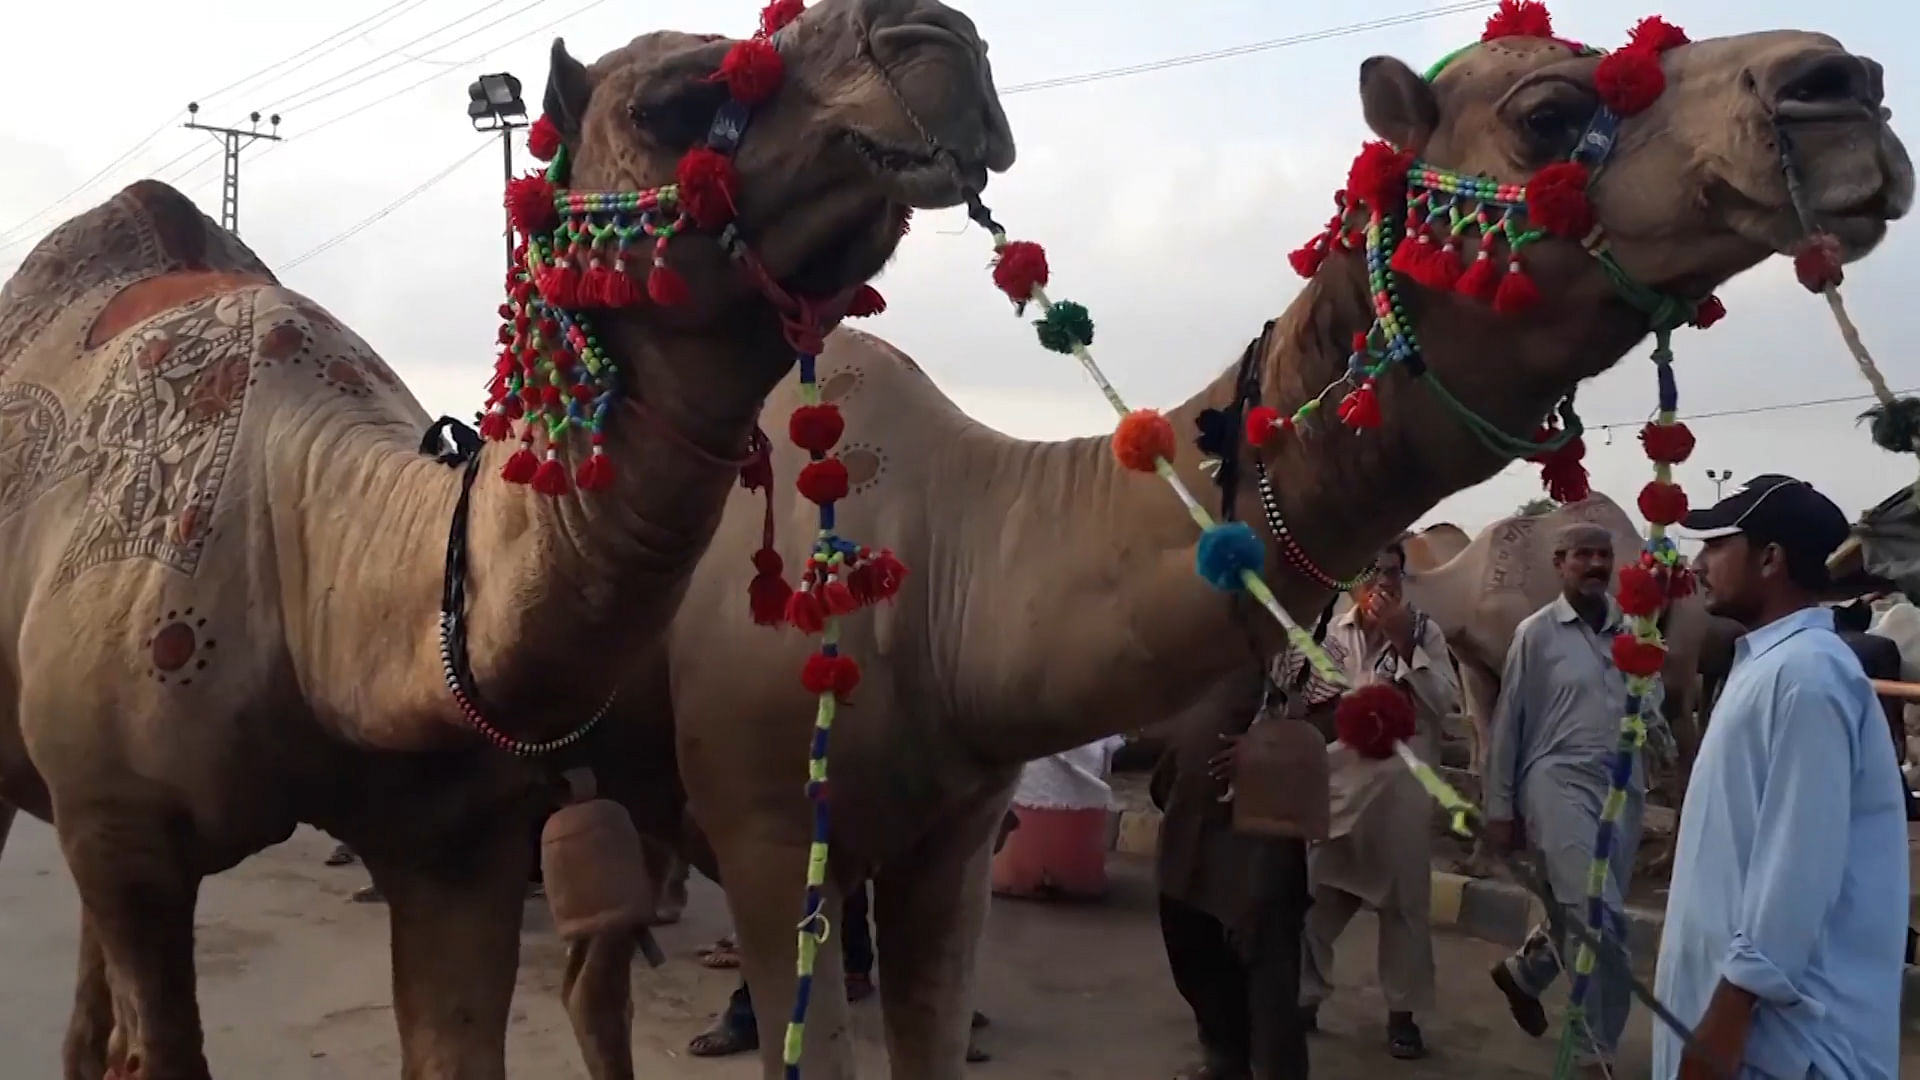 Camels walk through the Cattle Market in Karachi with beautiful art work on their coats